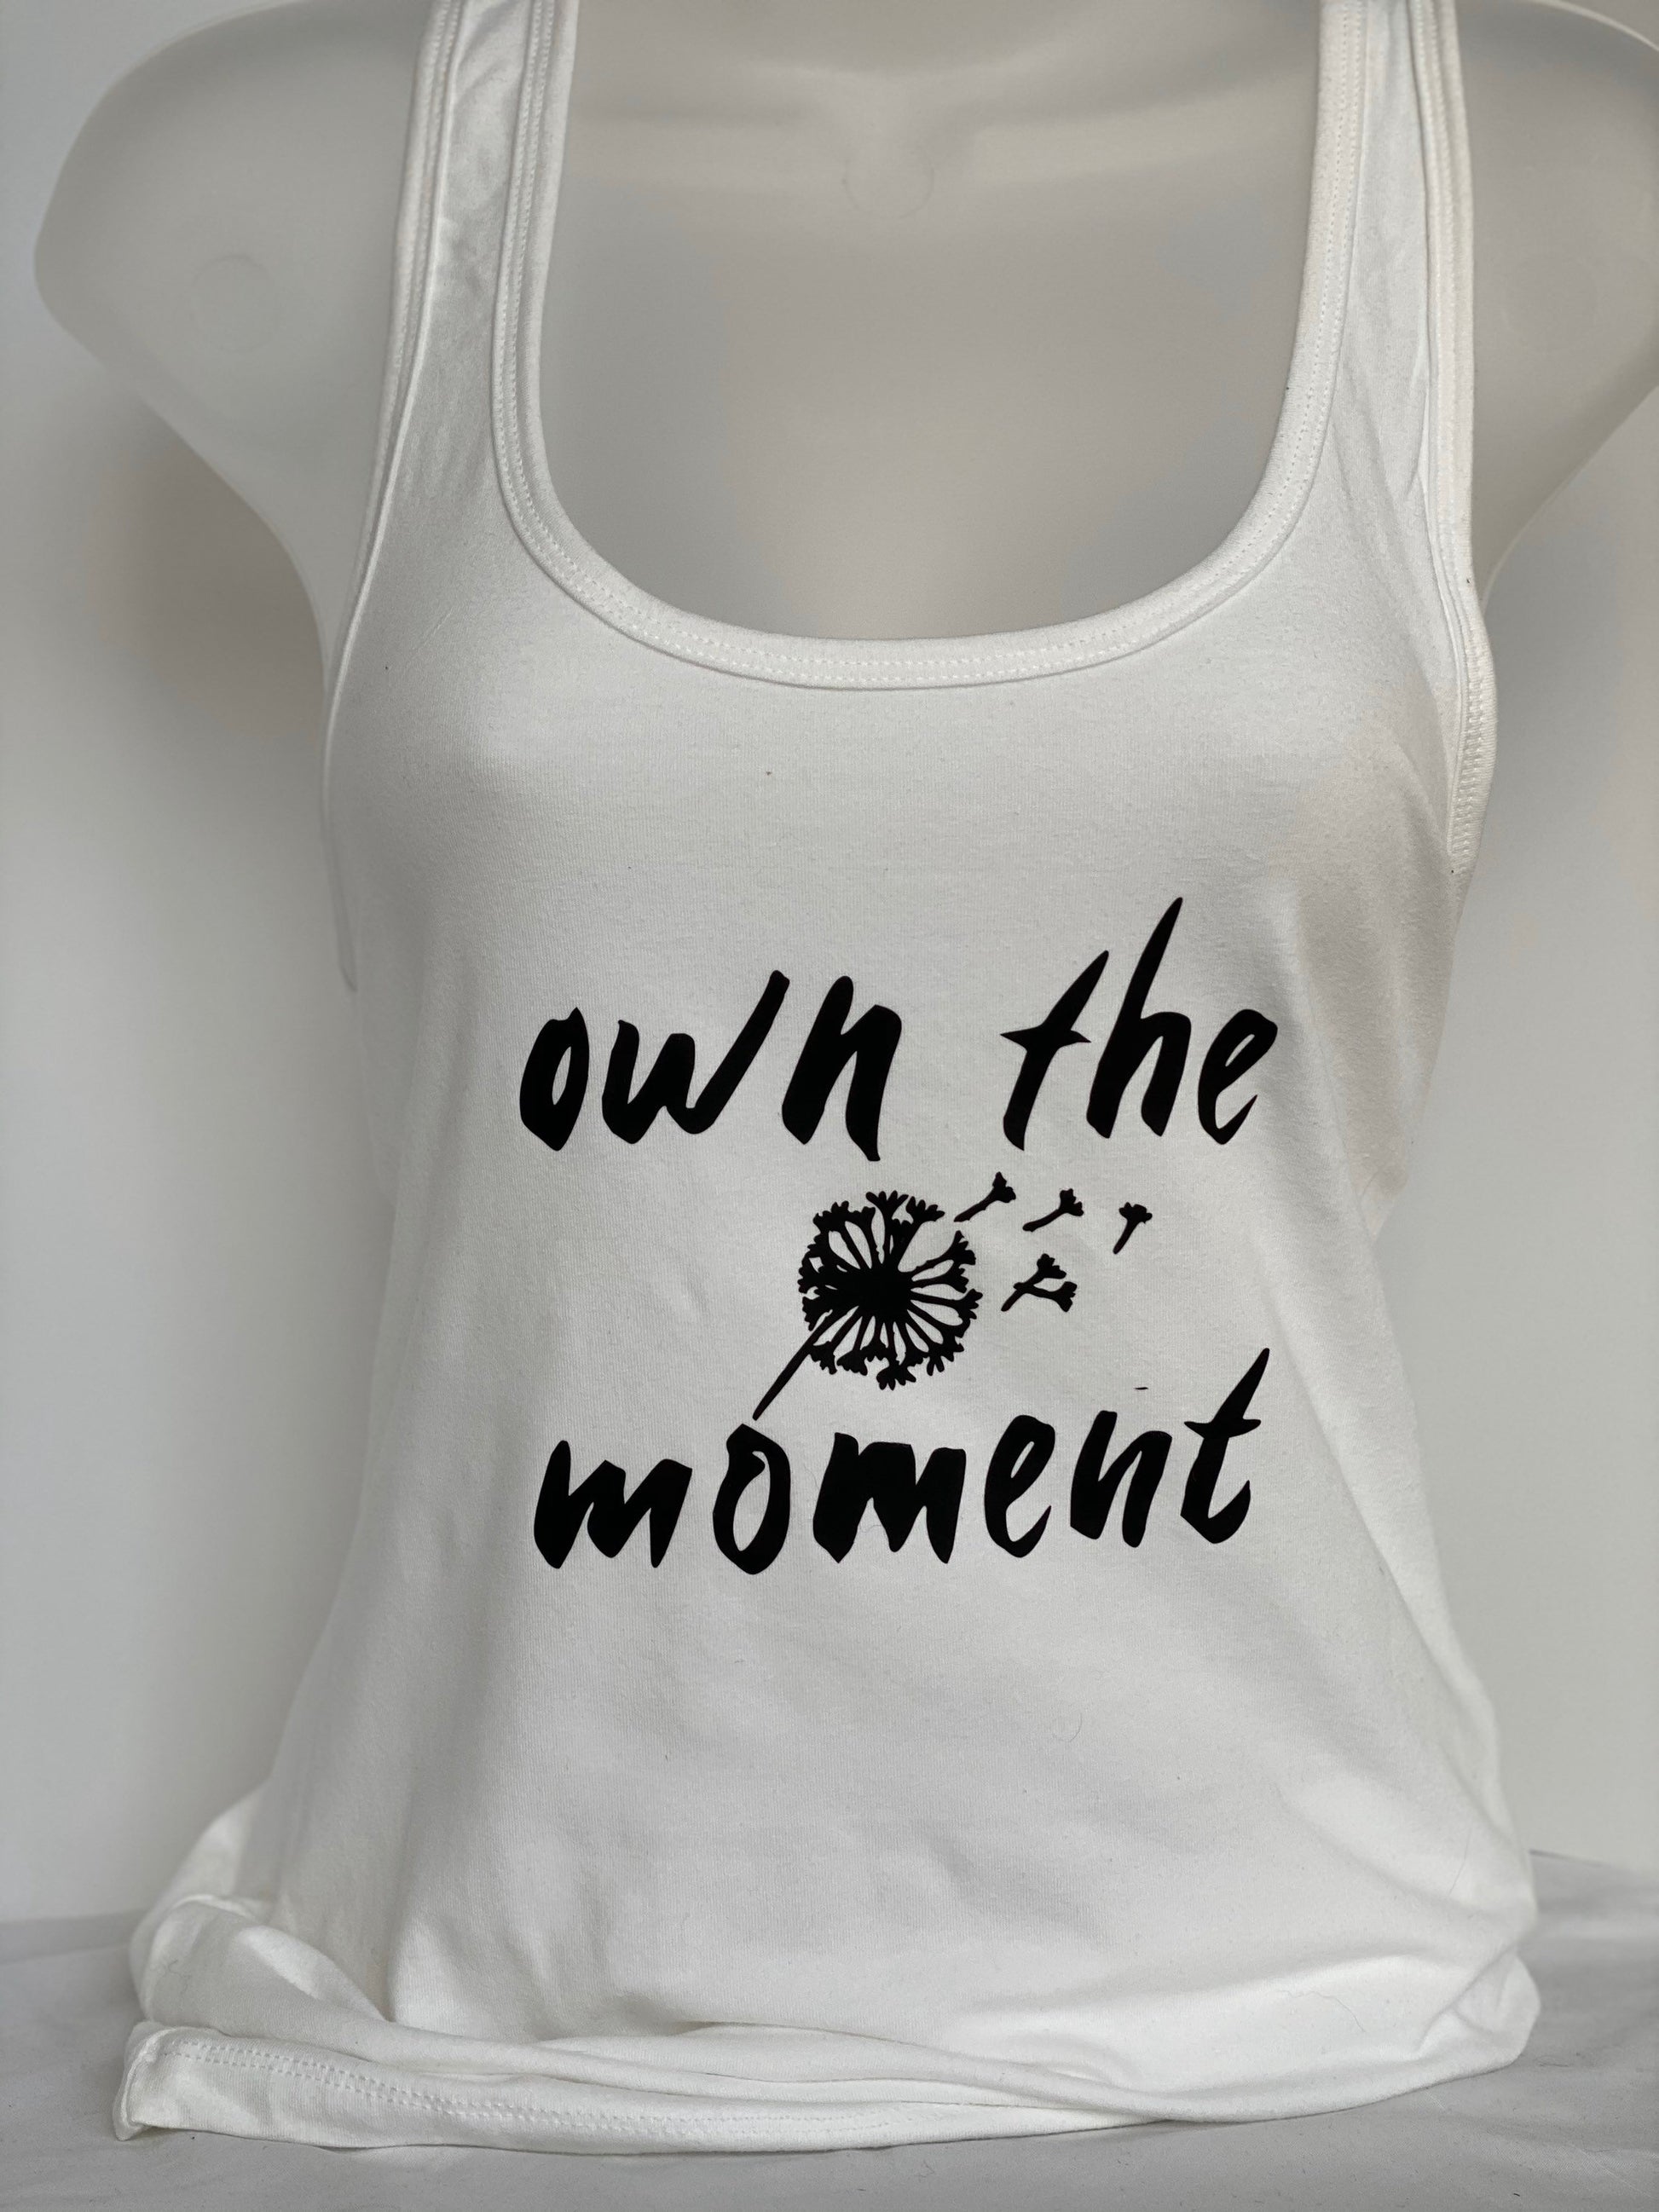 Own the Moment Tank, T-Shirt, Hoodie, or Tote, Carpe Diem, Seize the Day